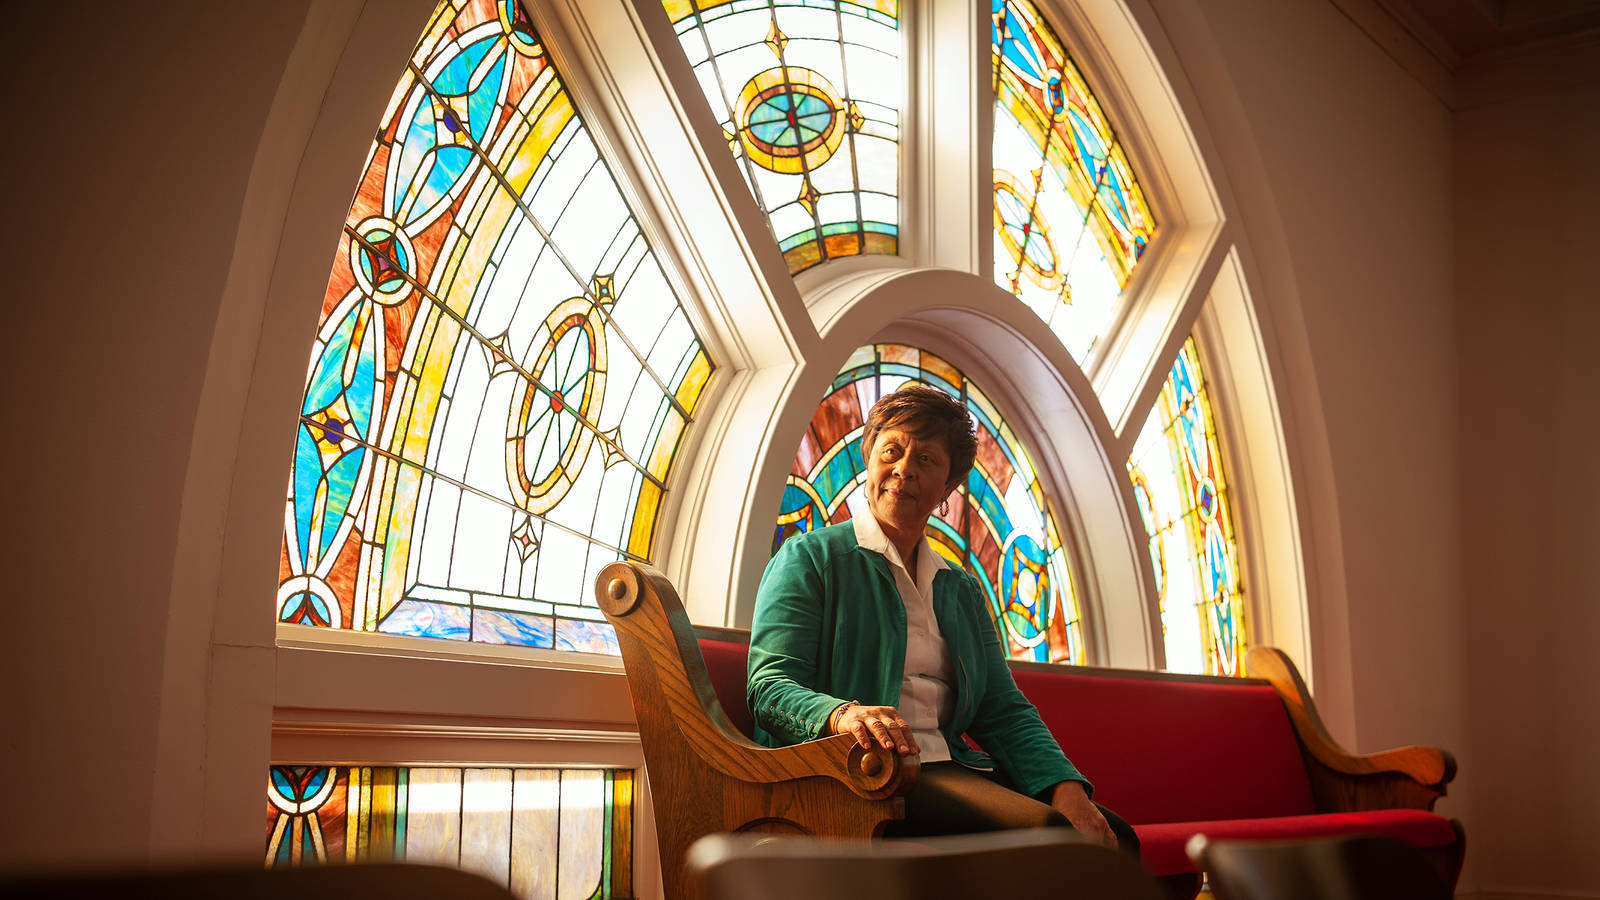 <p>Carolyn McKinstry at the 16th Street Baptist Church in Birmingham, Alabama. McKinstry was there on September 15, 1963, when the Ku Klux Klan bombed the church, killing four young girls.</p>